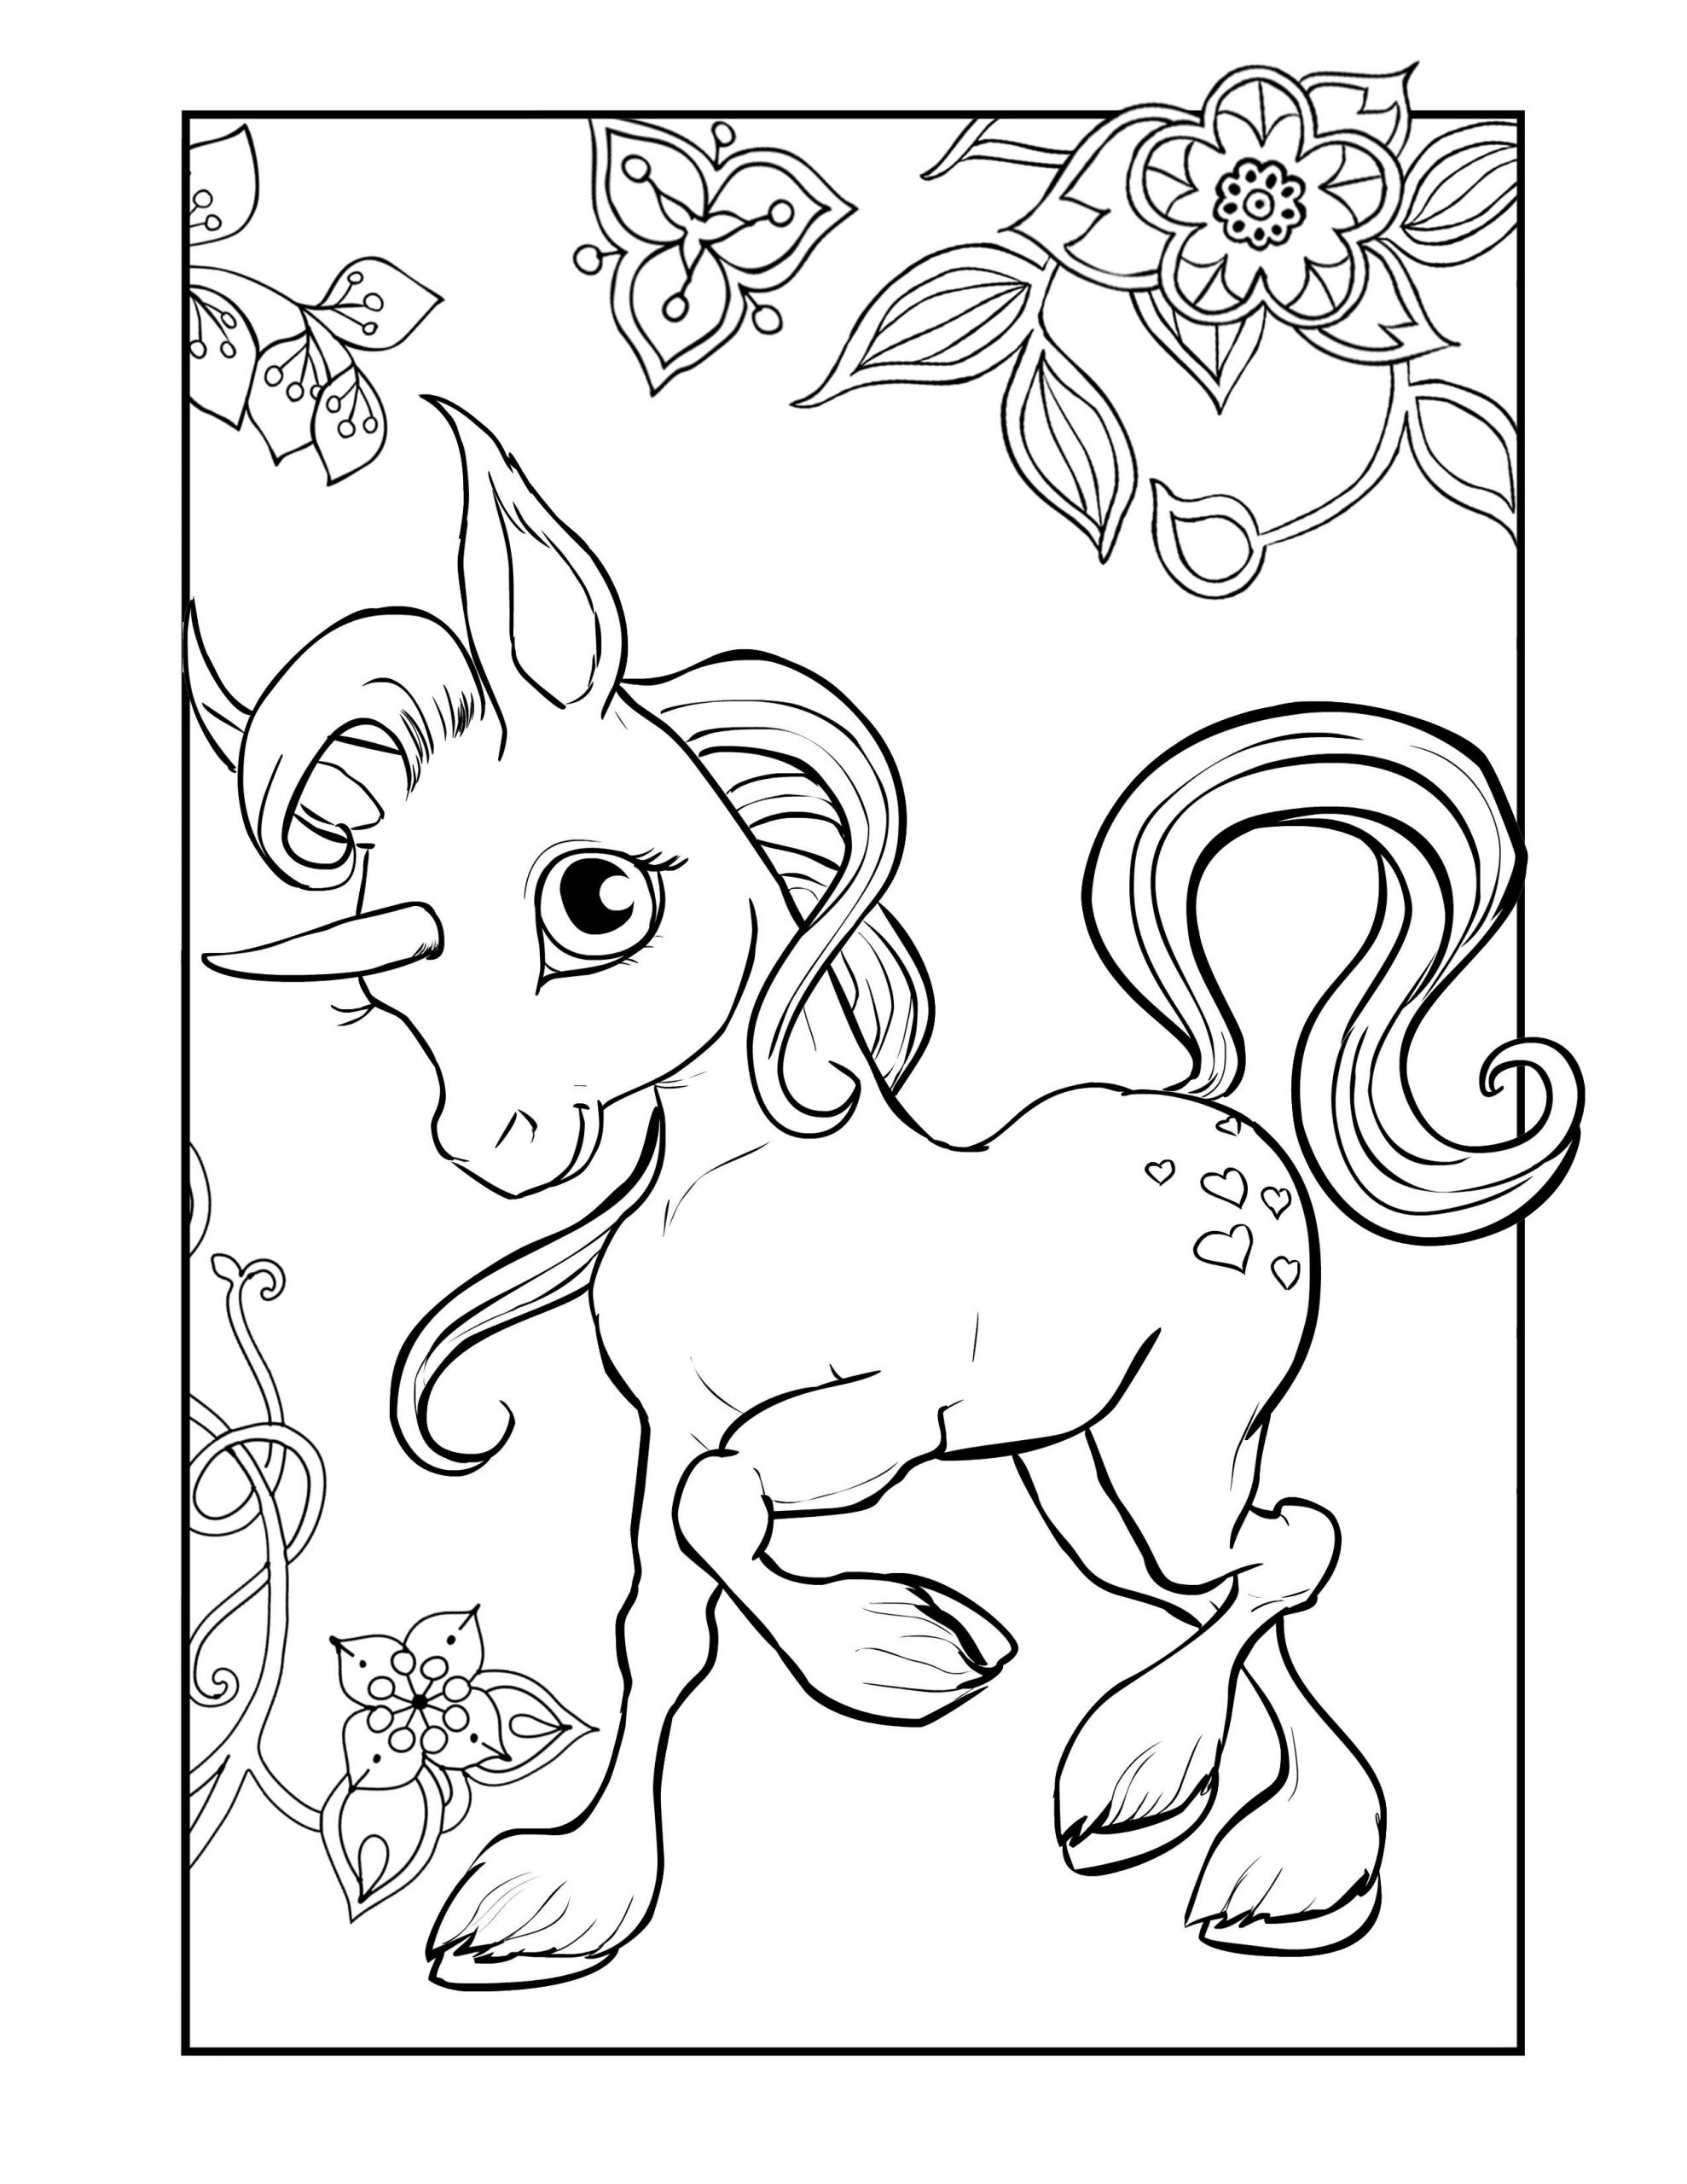 Coloring Pages For Girls Unicorn
 Pin on Horse Lovers Coloring Books